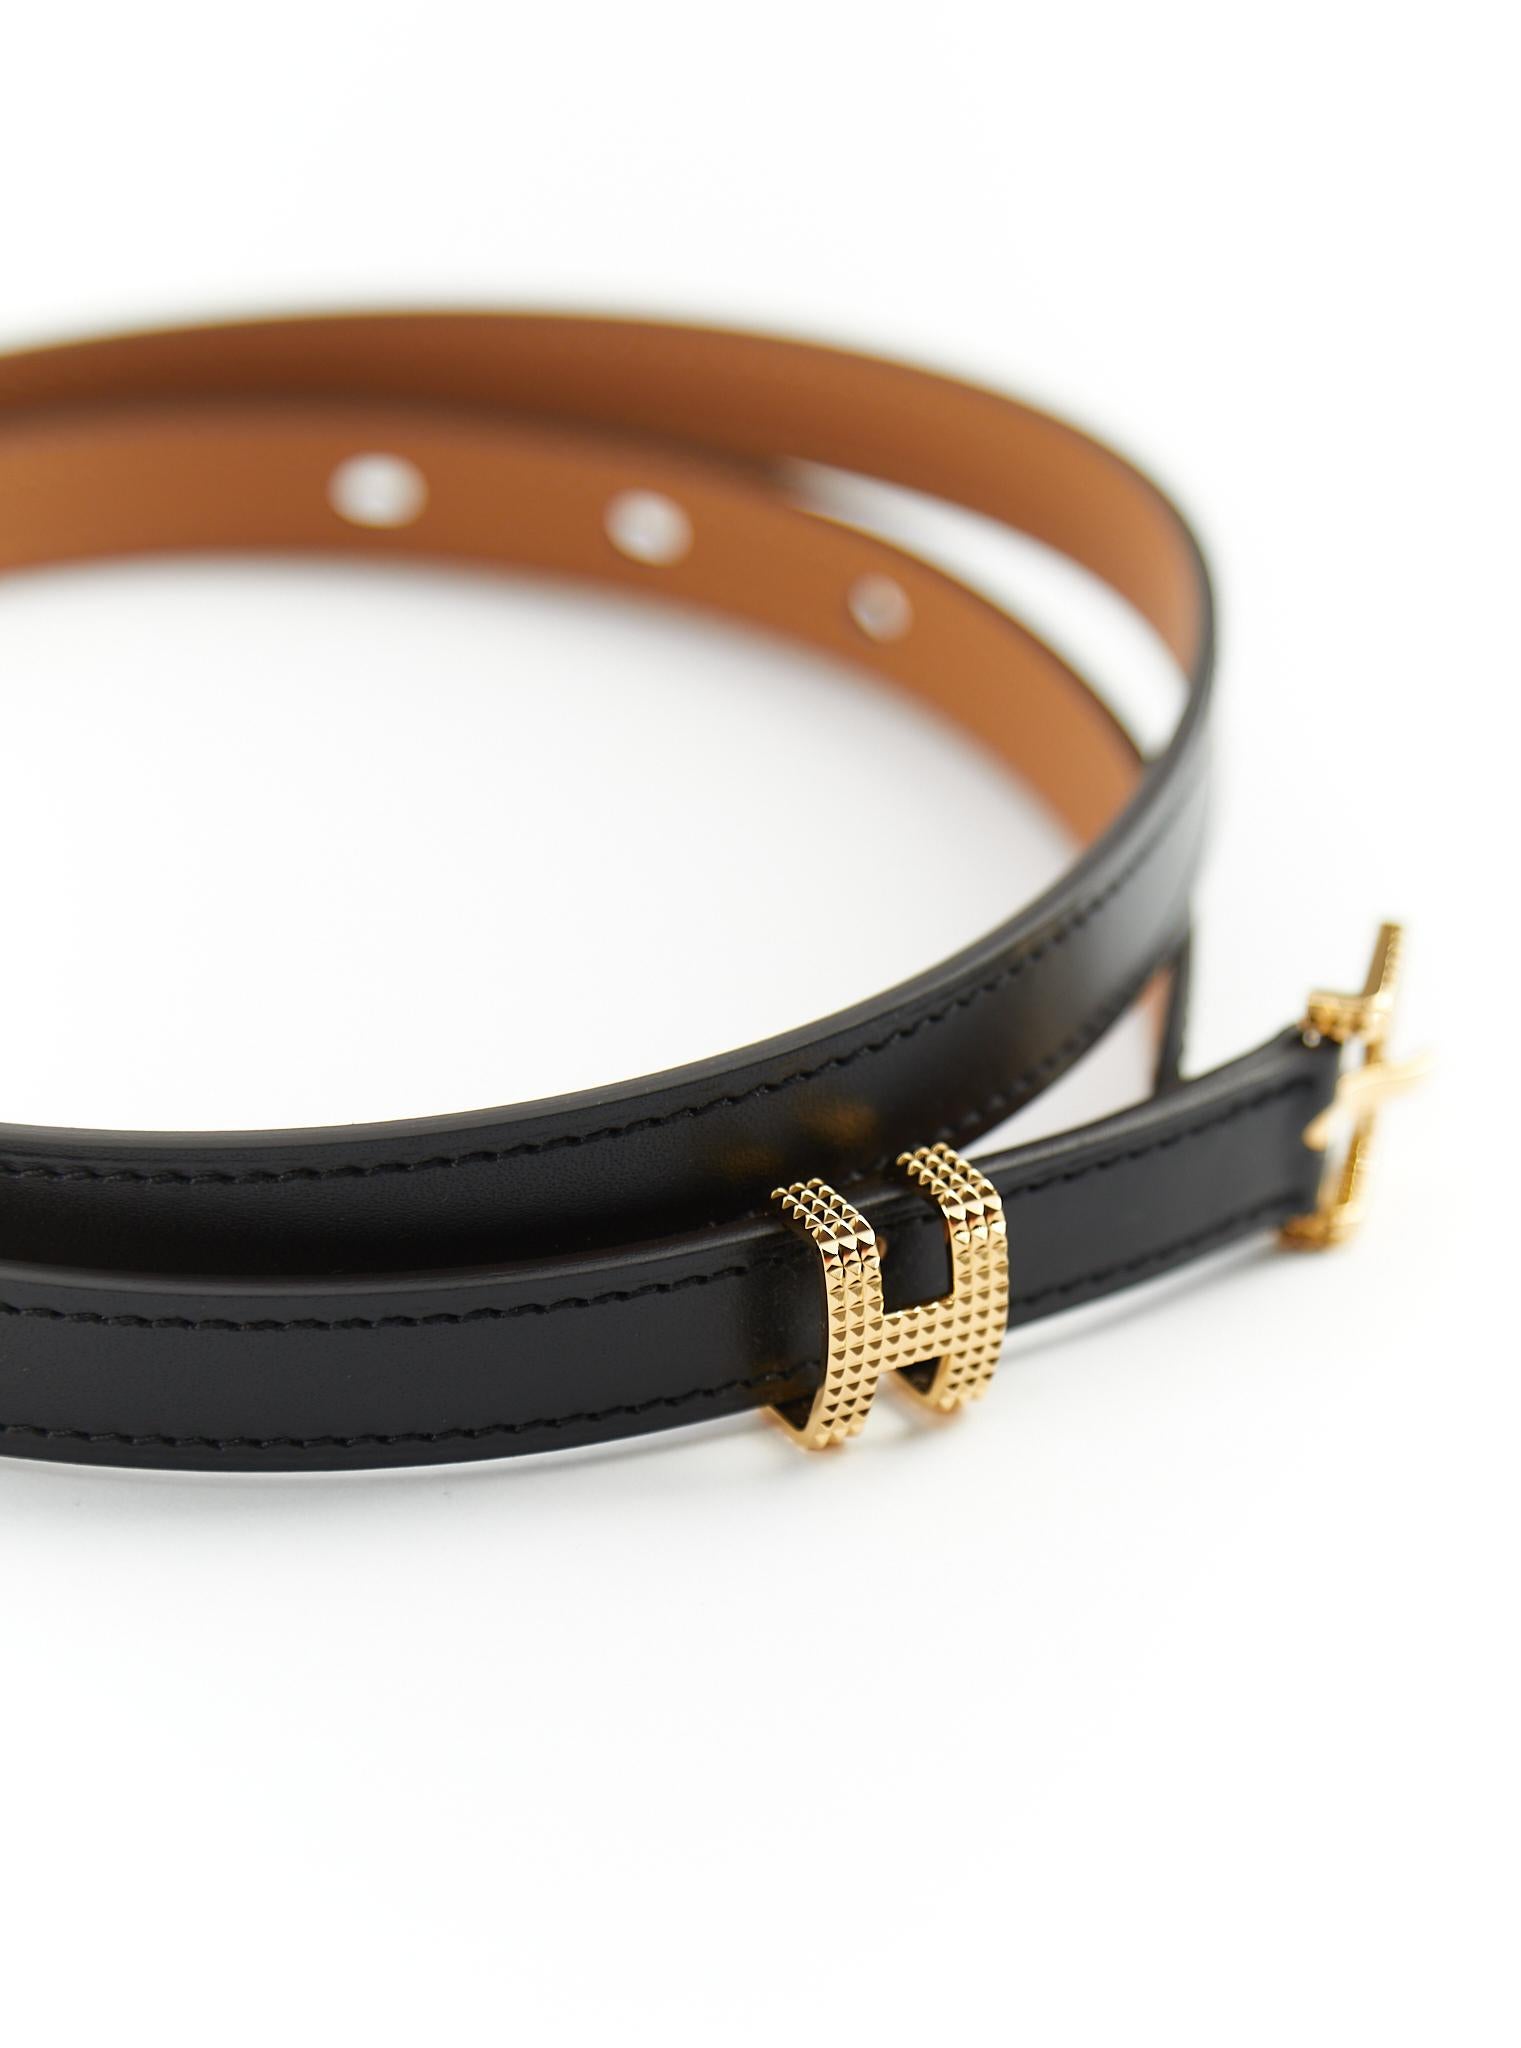 HERMÈS POP H GUILLOCHEE BELT 85 Black Box Leather with Gold Hardware In New Condition For Sale In London, GB